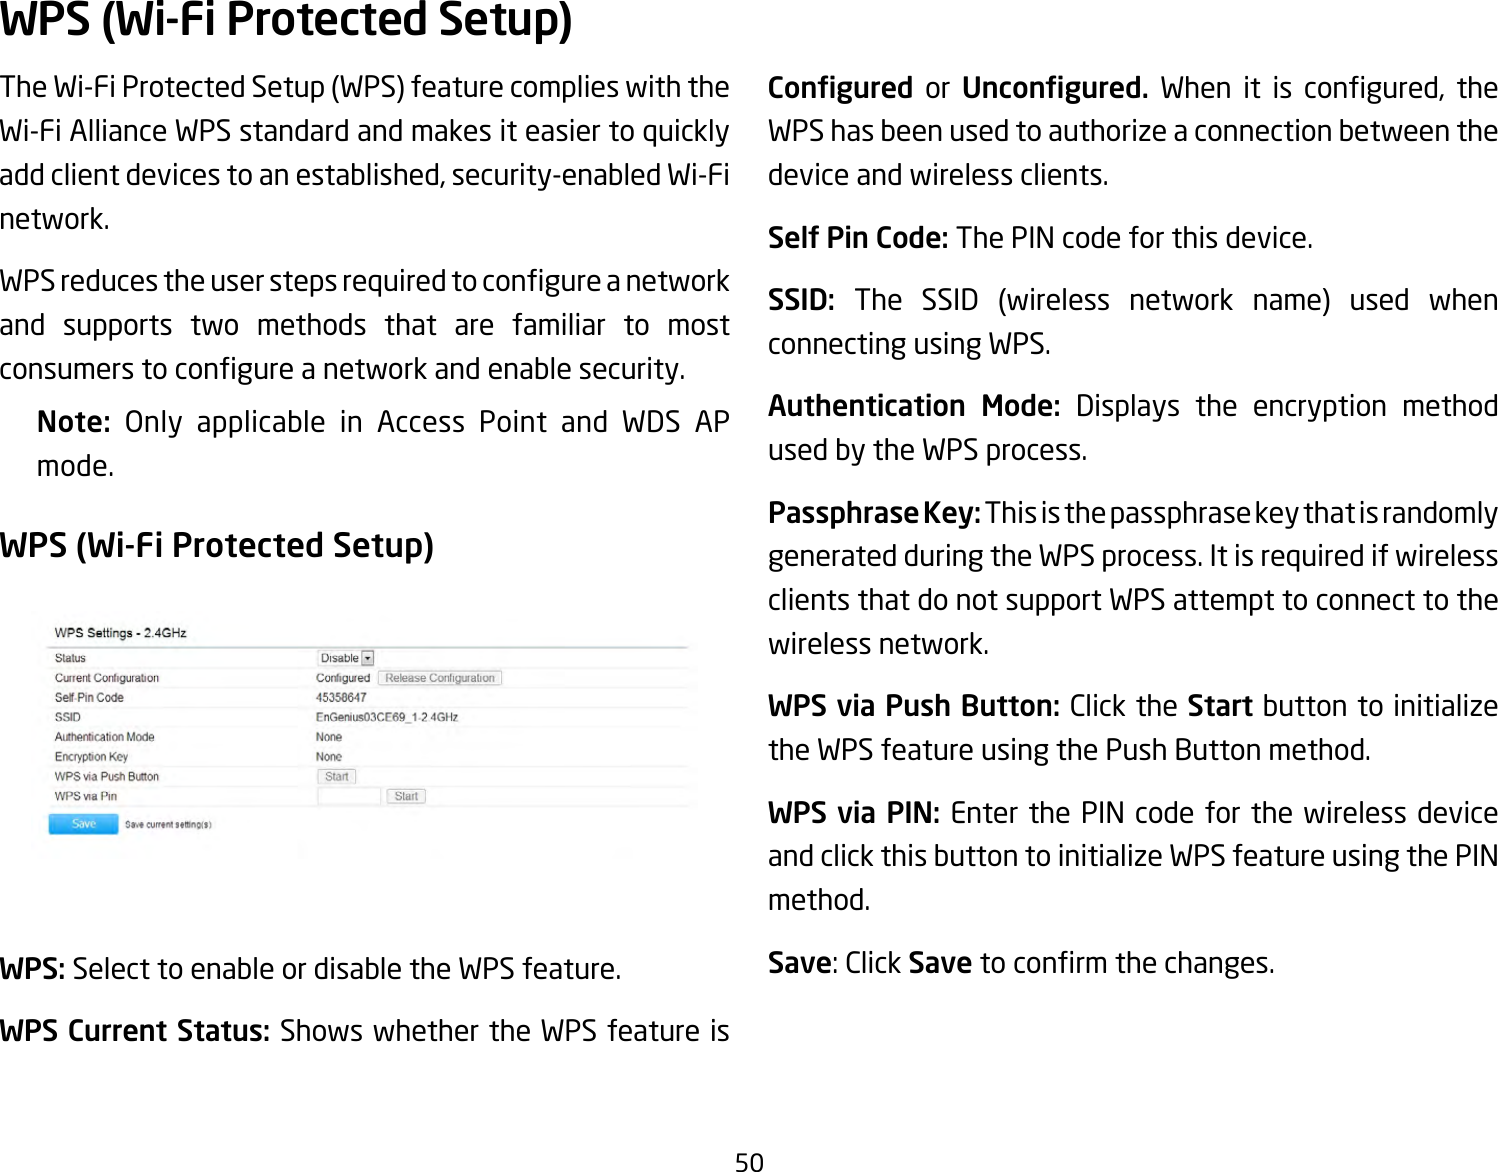 50TheWi-FiProtectedSetup(WPS)featurecomplieswiththeWi-Fi Alliance WPS standard and makes it easier to quickly addclientdevicestoanestablished,security-enabledWi-Finetwork. WPSreducestheuserstepsrequiredtocongureanetworkand supports two methods that are familiar to most consumerstocongureanetworkandenablesecurity.Note:  Only applicable in Access Point and WDS AP mode.WPS (Wi-Fi Protected Setup)WPS: Select to enable or disable the WPS feature.WPS Current Status: Shows whether the WPS feature is Congured  or  Uncongured. When it is congured, theWPS has been used to authorize a connection between the device and wireless clients.Self Pin Code: The PIN code for this device.SSID:  The SSID (wireless network name) used whenconnecting using WPS.Authentication Mode: Displays the encryption method used by the WPS process.Passphrase Key: This is the passphrase key that is randomly generated during the WPS process. It is required if wireless clients that do not support WPS attempt to connect to the wireless network.WPS via Push Button: Click the Start button to initialize the WPS feature using the Push Button method.WPS via PIN: Enter the PIN code for the wireless device and click this button to initialize WPS feature using the PIN method.Save:ClickSavetoconrmthechanges.WPS (Wi-Fi Protected Setup)